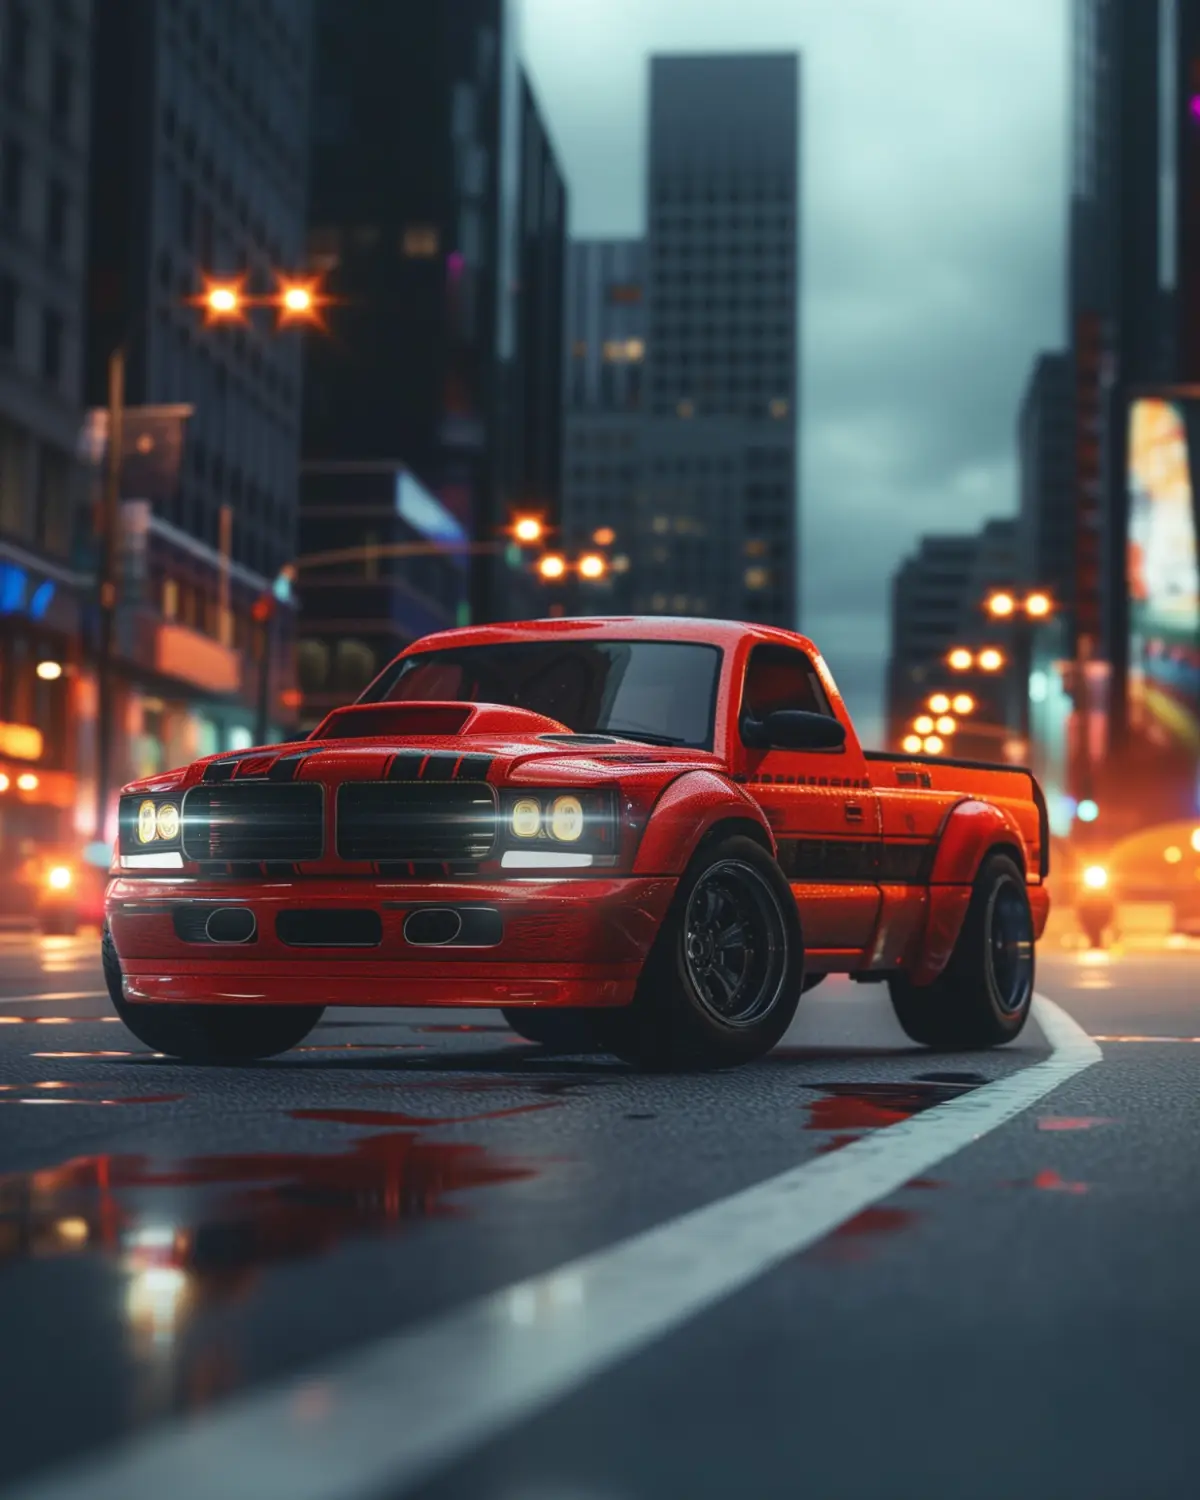 Red Dodge Dakota with street performance modifications in city setting